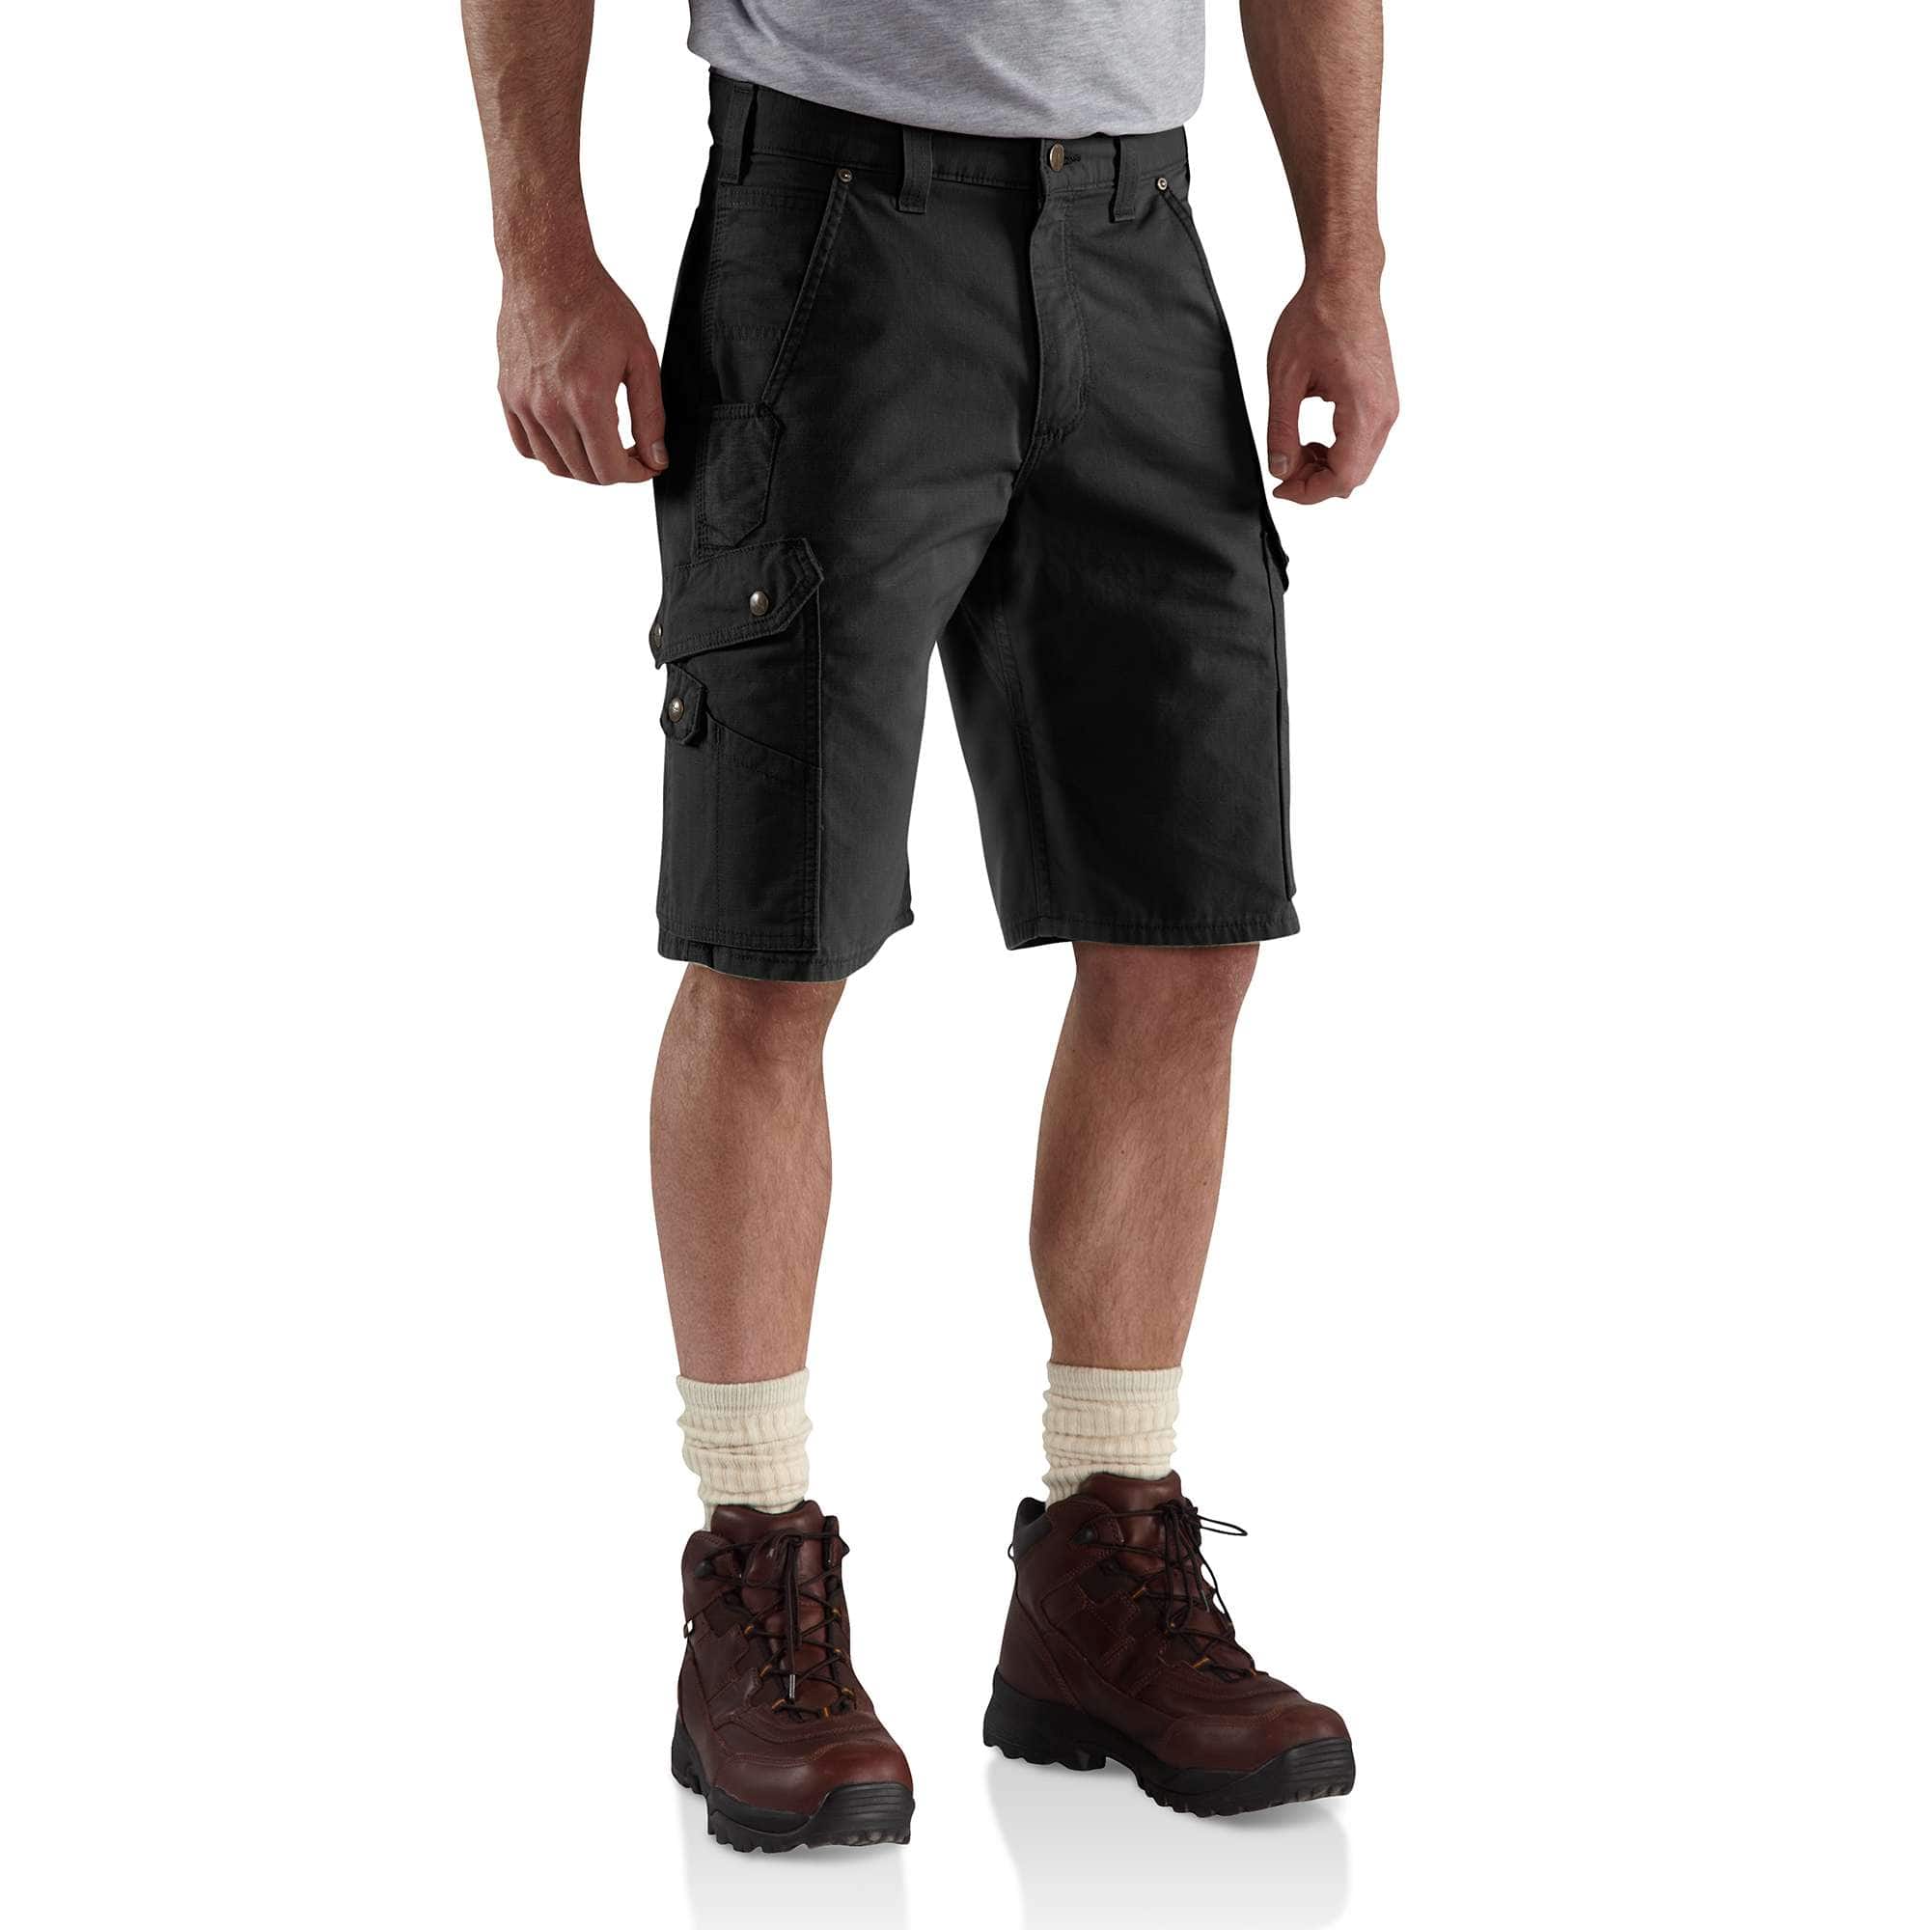 shorts with work boots